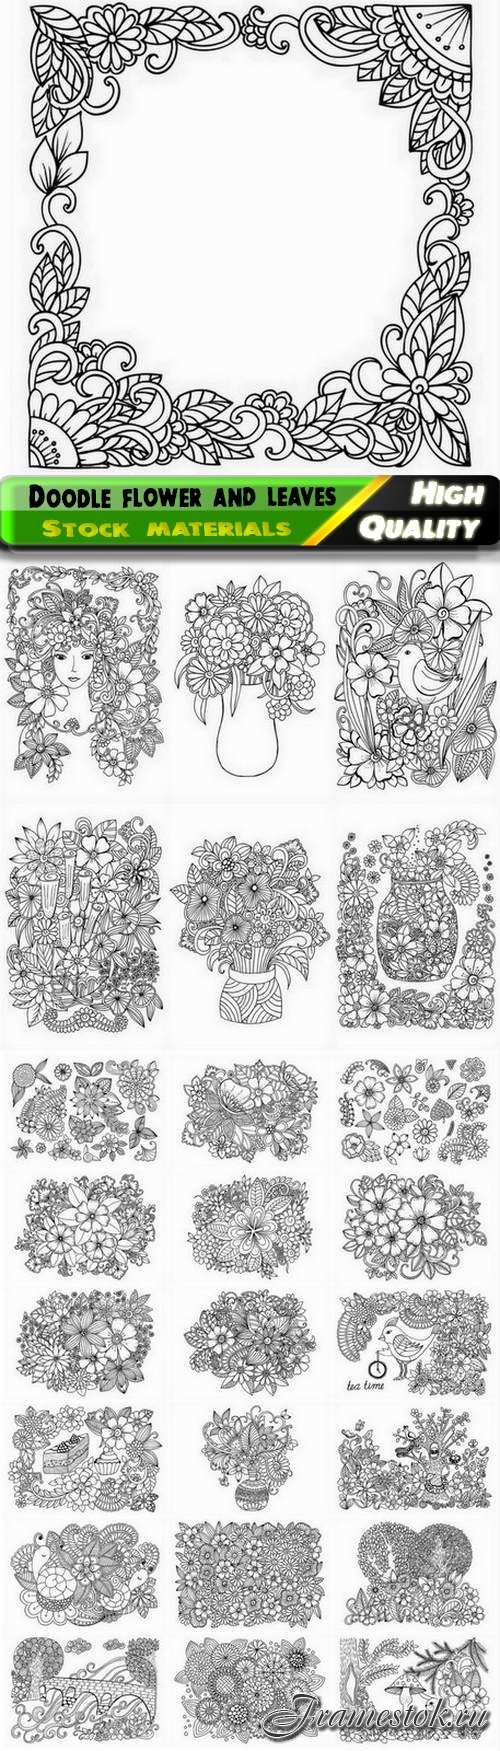 Illustrations of doodle flower leaves and plant for coloring book - 25 Eps